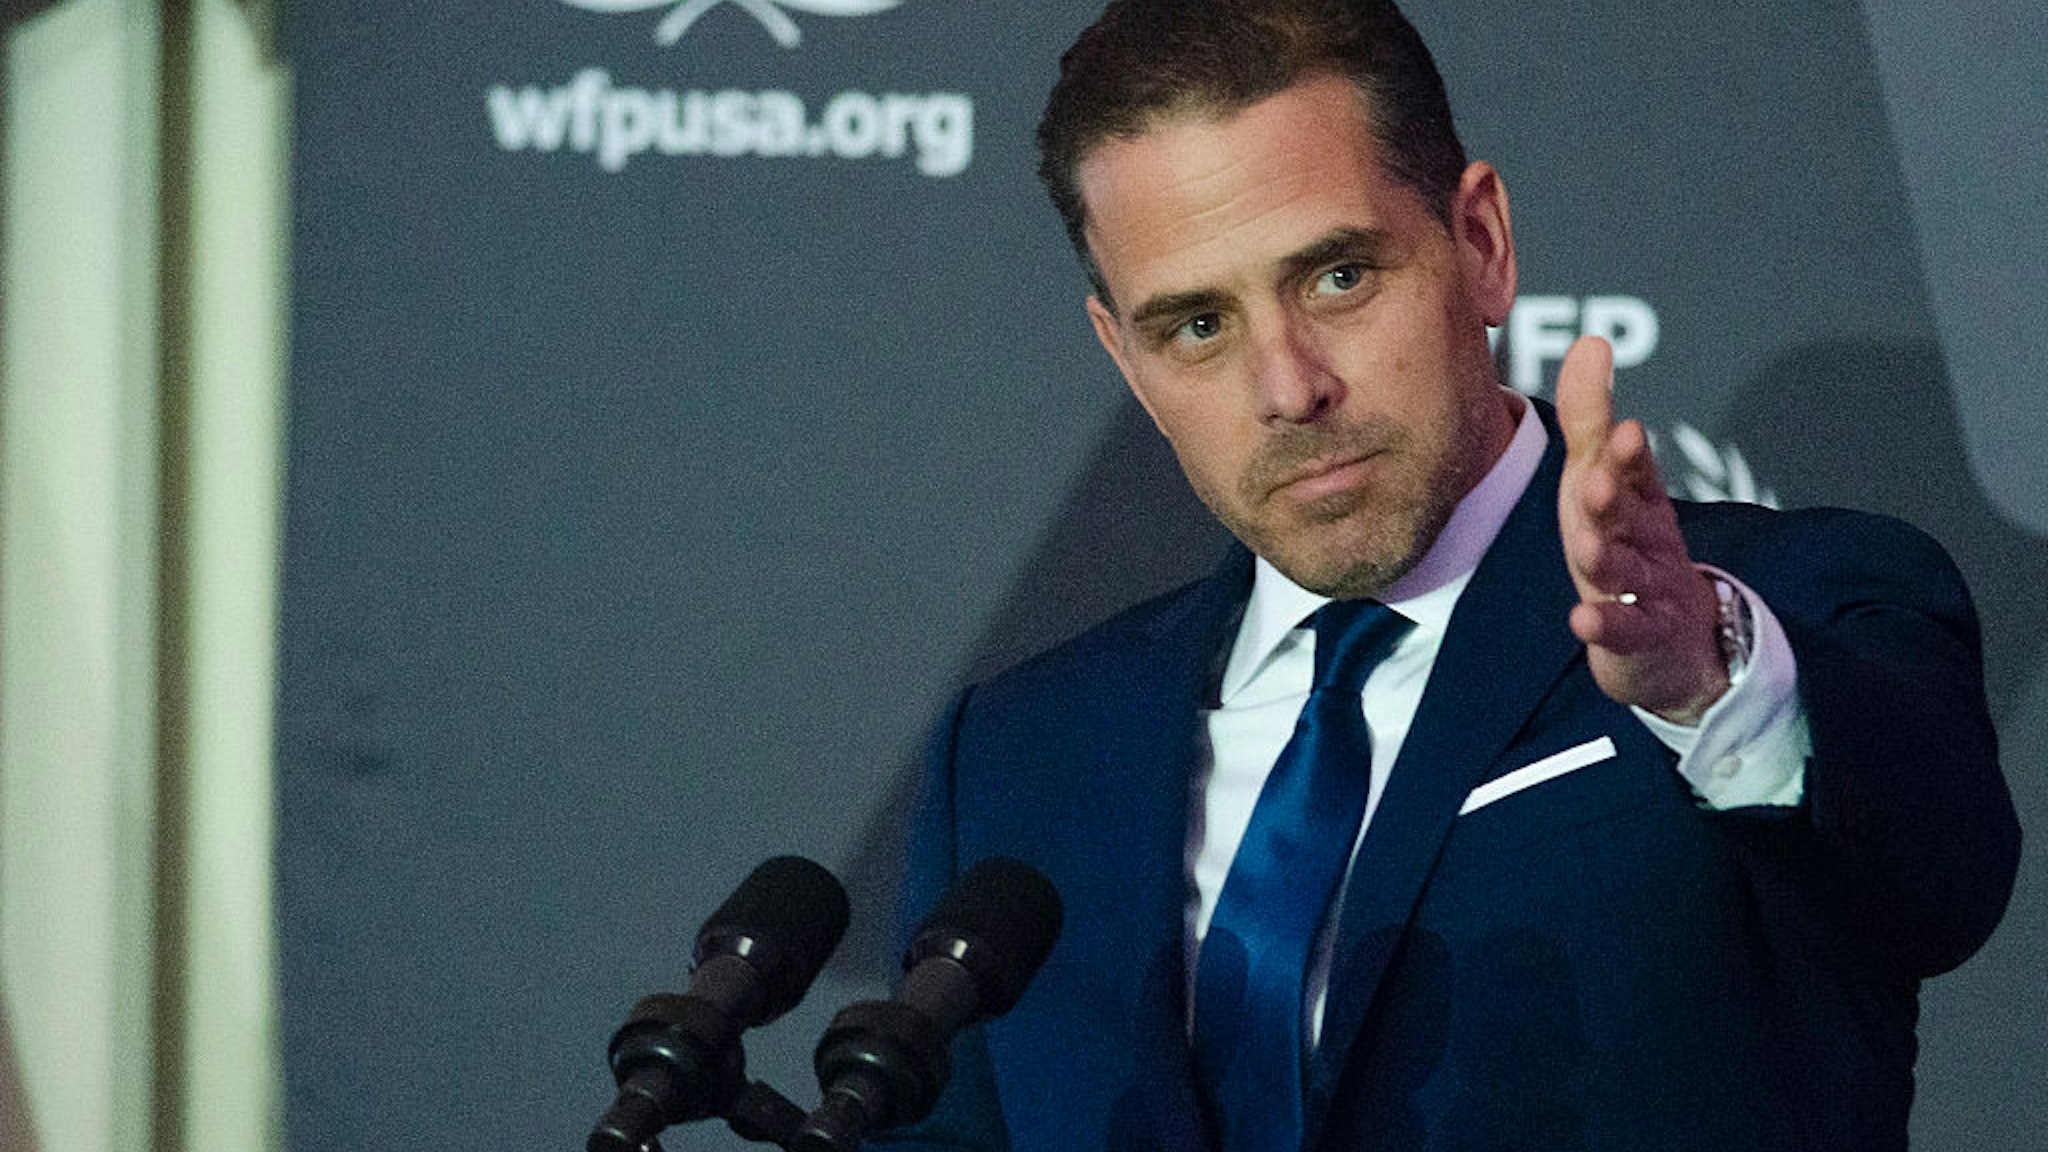 WASHINGTON, DC - APRIL 12: WFP USA Board Chair Hunter Biden speaks during the World Food Program USA's 2016 McGovern-Dole Leadership Award Ceremony at the Organization of American States on April 12, 2016 in Washington, DC. (Kris Connor/WireImage)